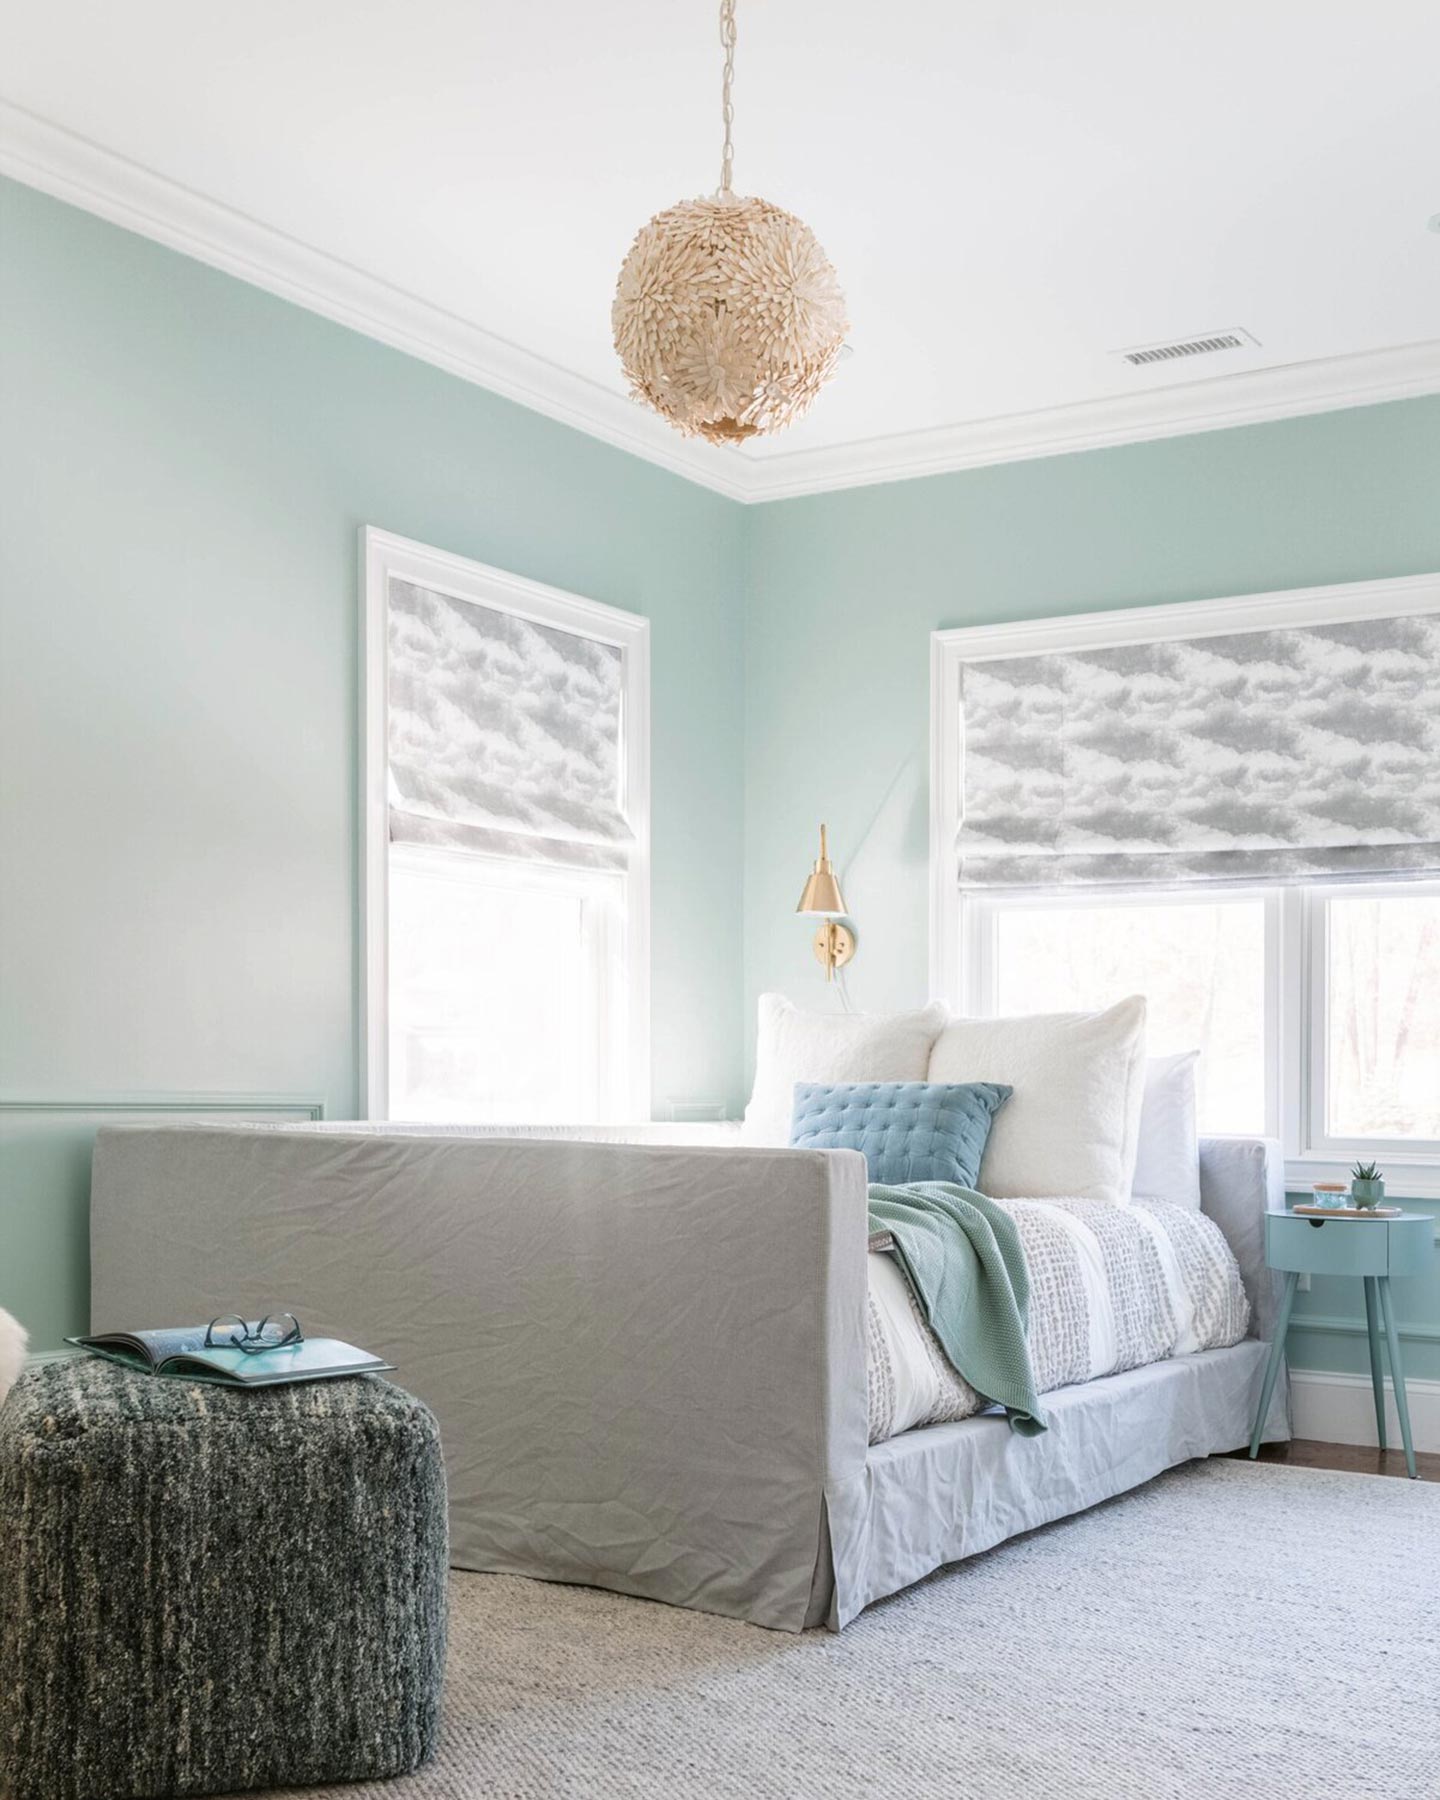 Bedroom paint colors like Headspace, an airy blue-green, help promote peace and relaxation.